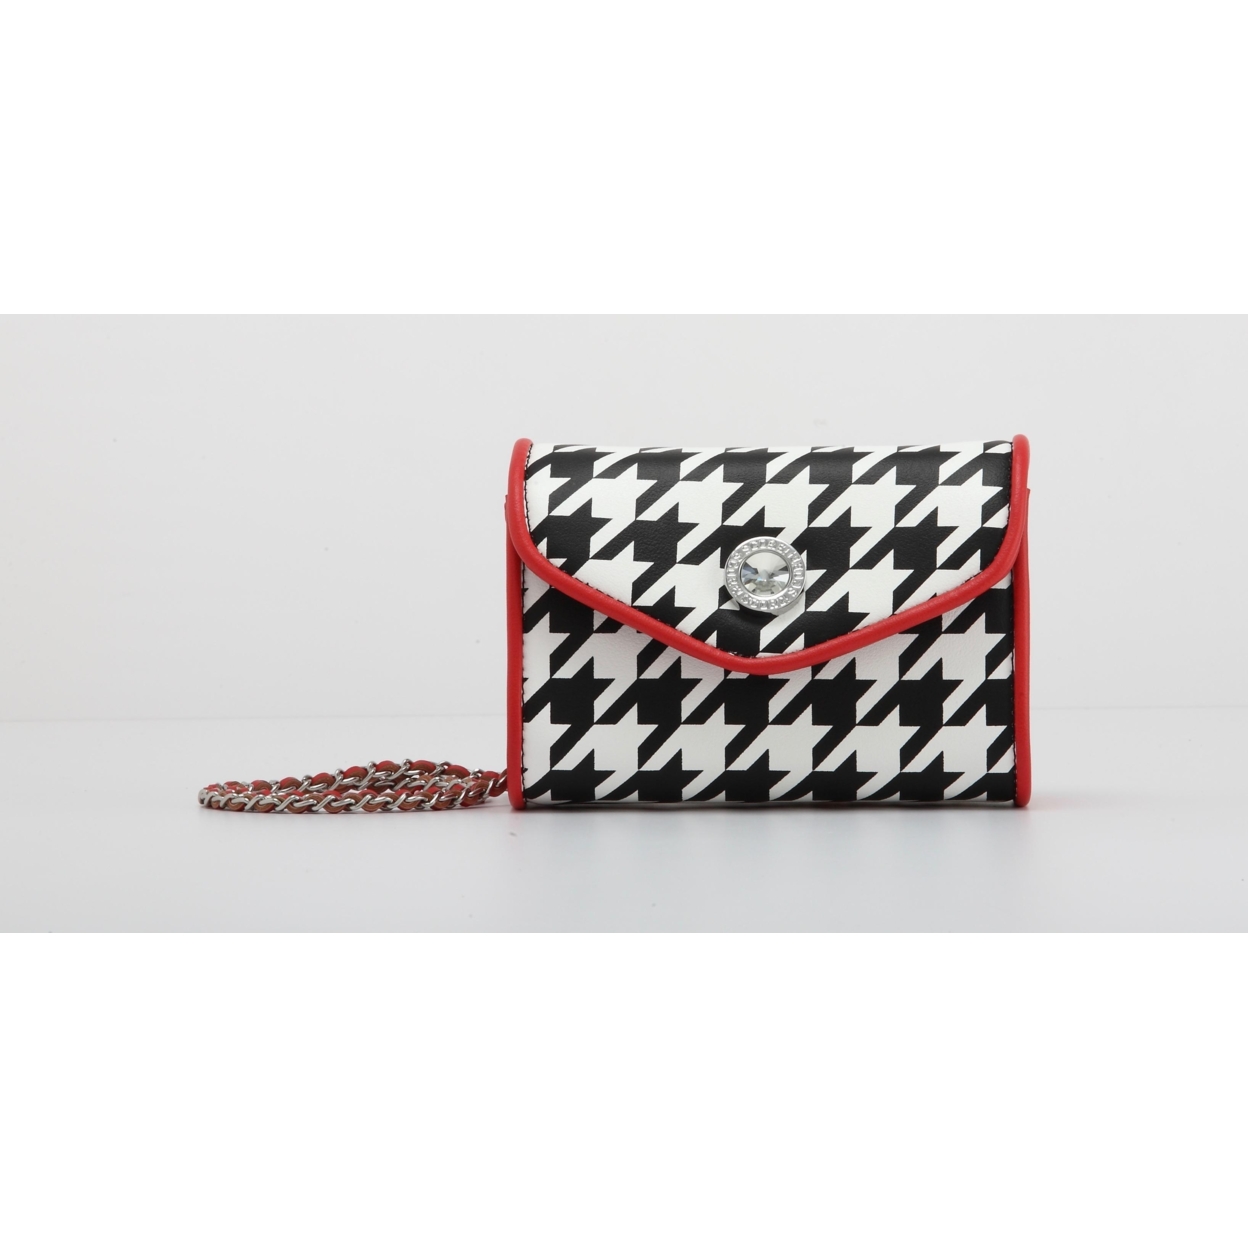 SCORE! Eva Designer Crossbody Clutch - Black And White Houndstooth With Racing Red